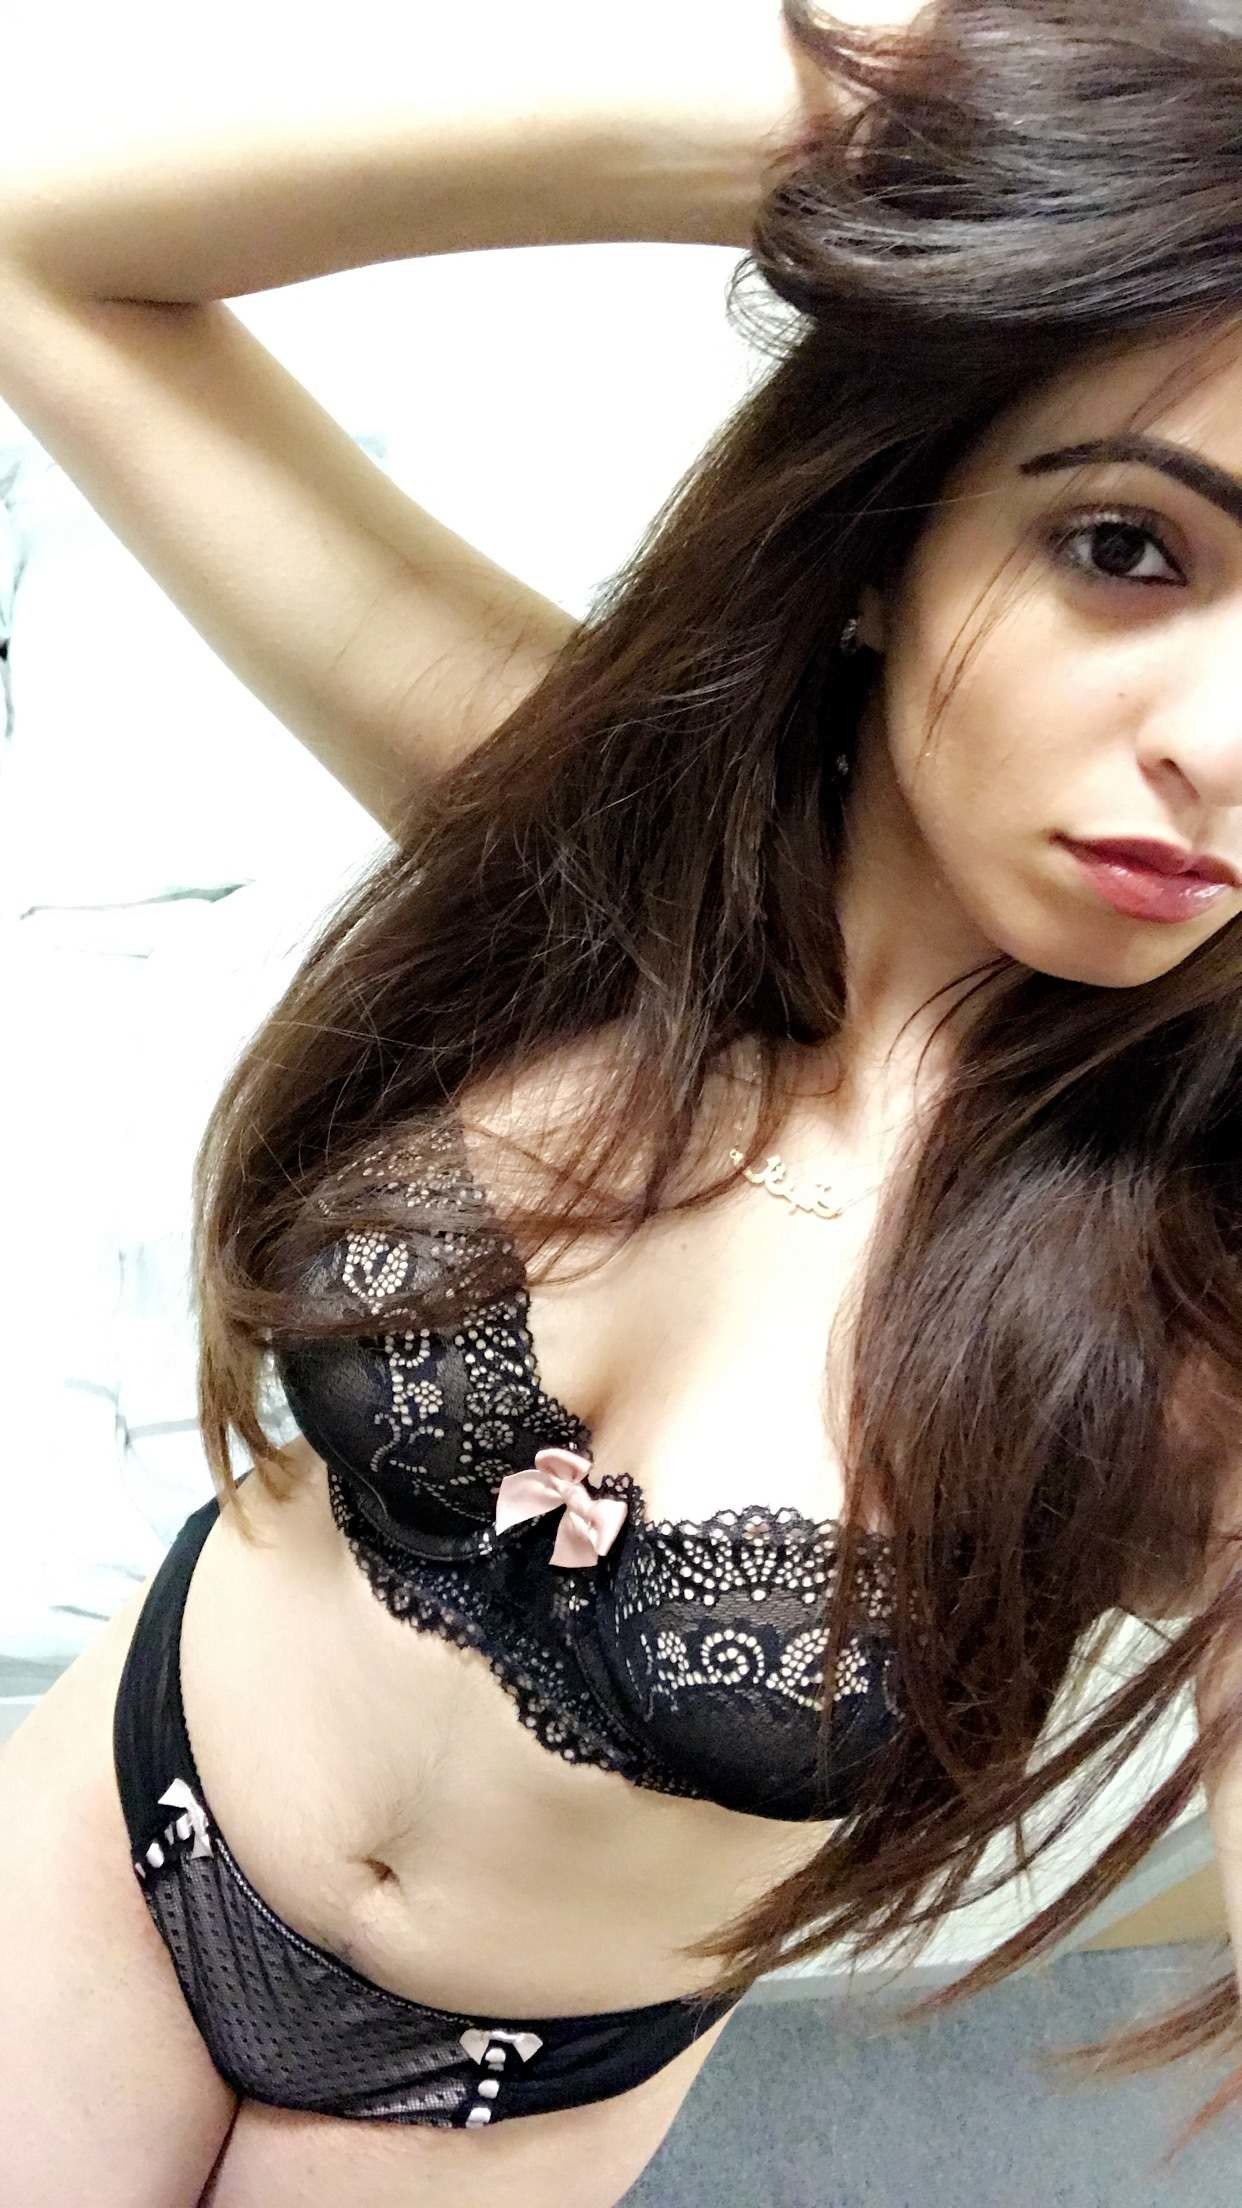 Horny Indian Bitch Nudes